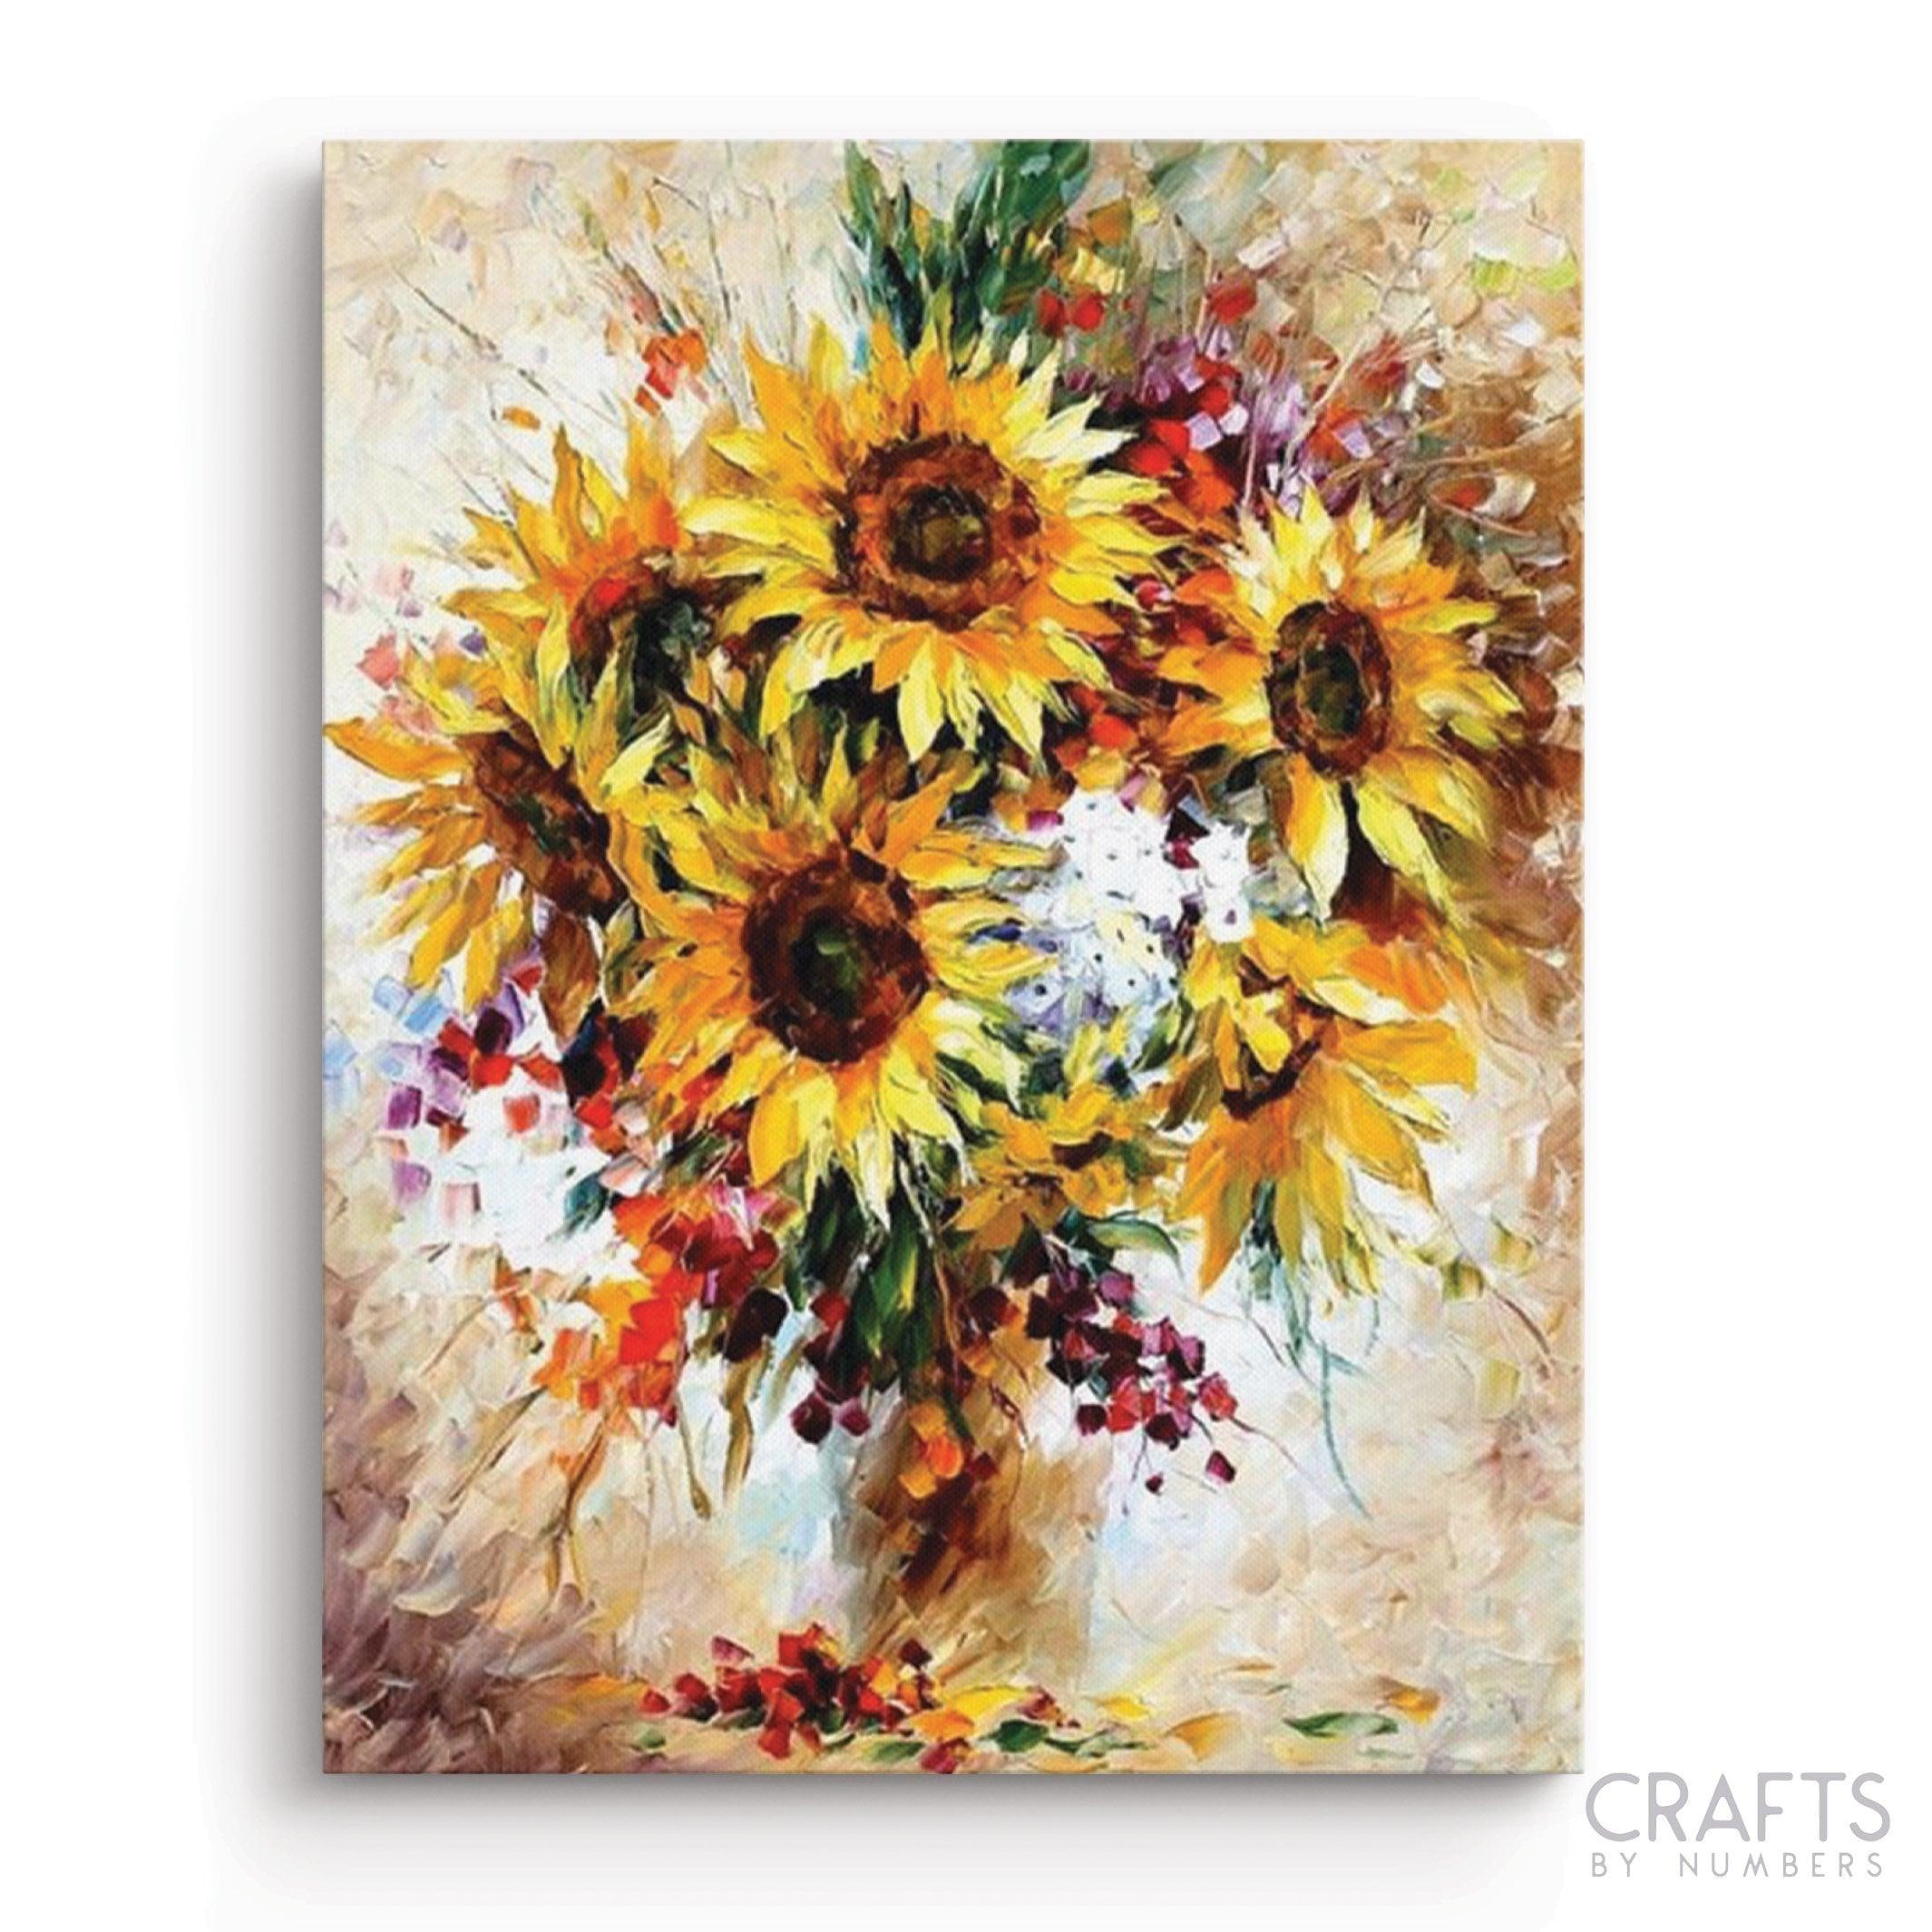 Sunflower Field - Paint by Numbers Kit for Adults DIY Oil Painting Kit on  Wood Stretched Canvas 16x20